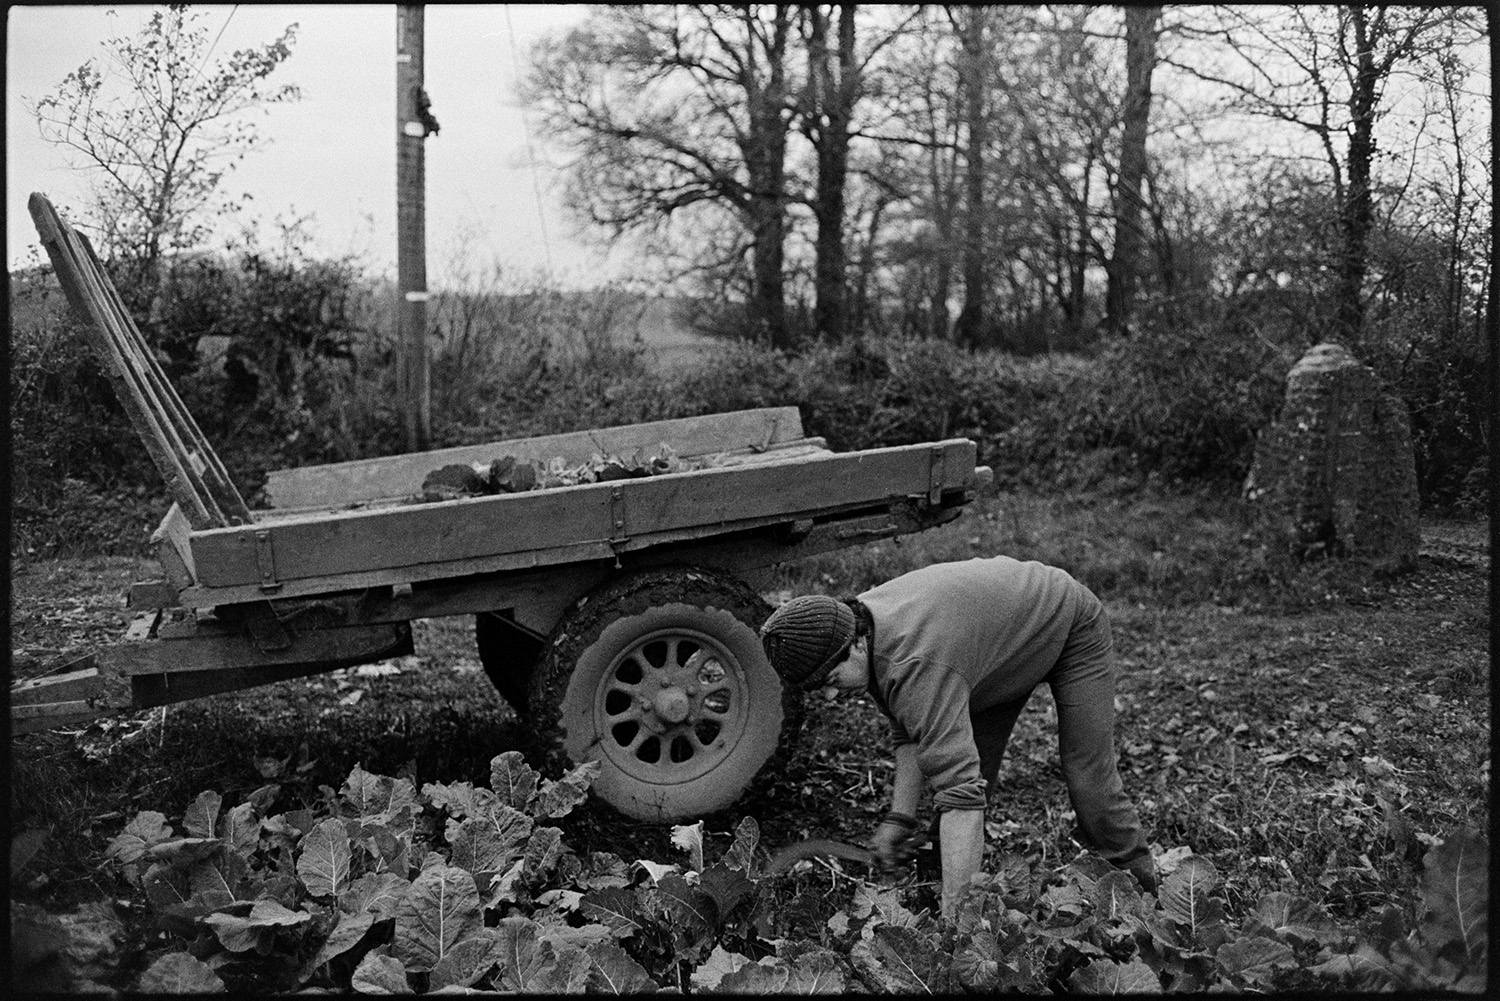 Cutting and loading kale. 
[David Ward cutting kale with a billhook and loading it onto a trailer in a field at Parsonage, Iddesleigh.]